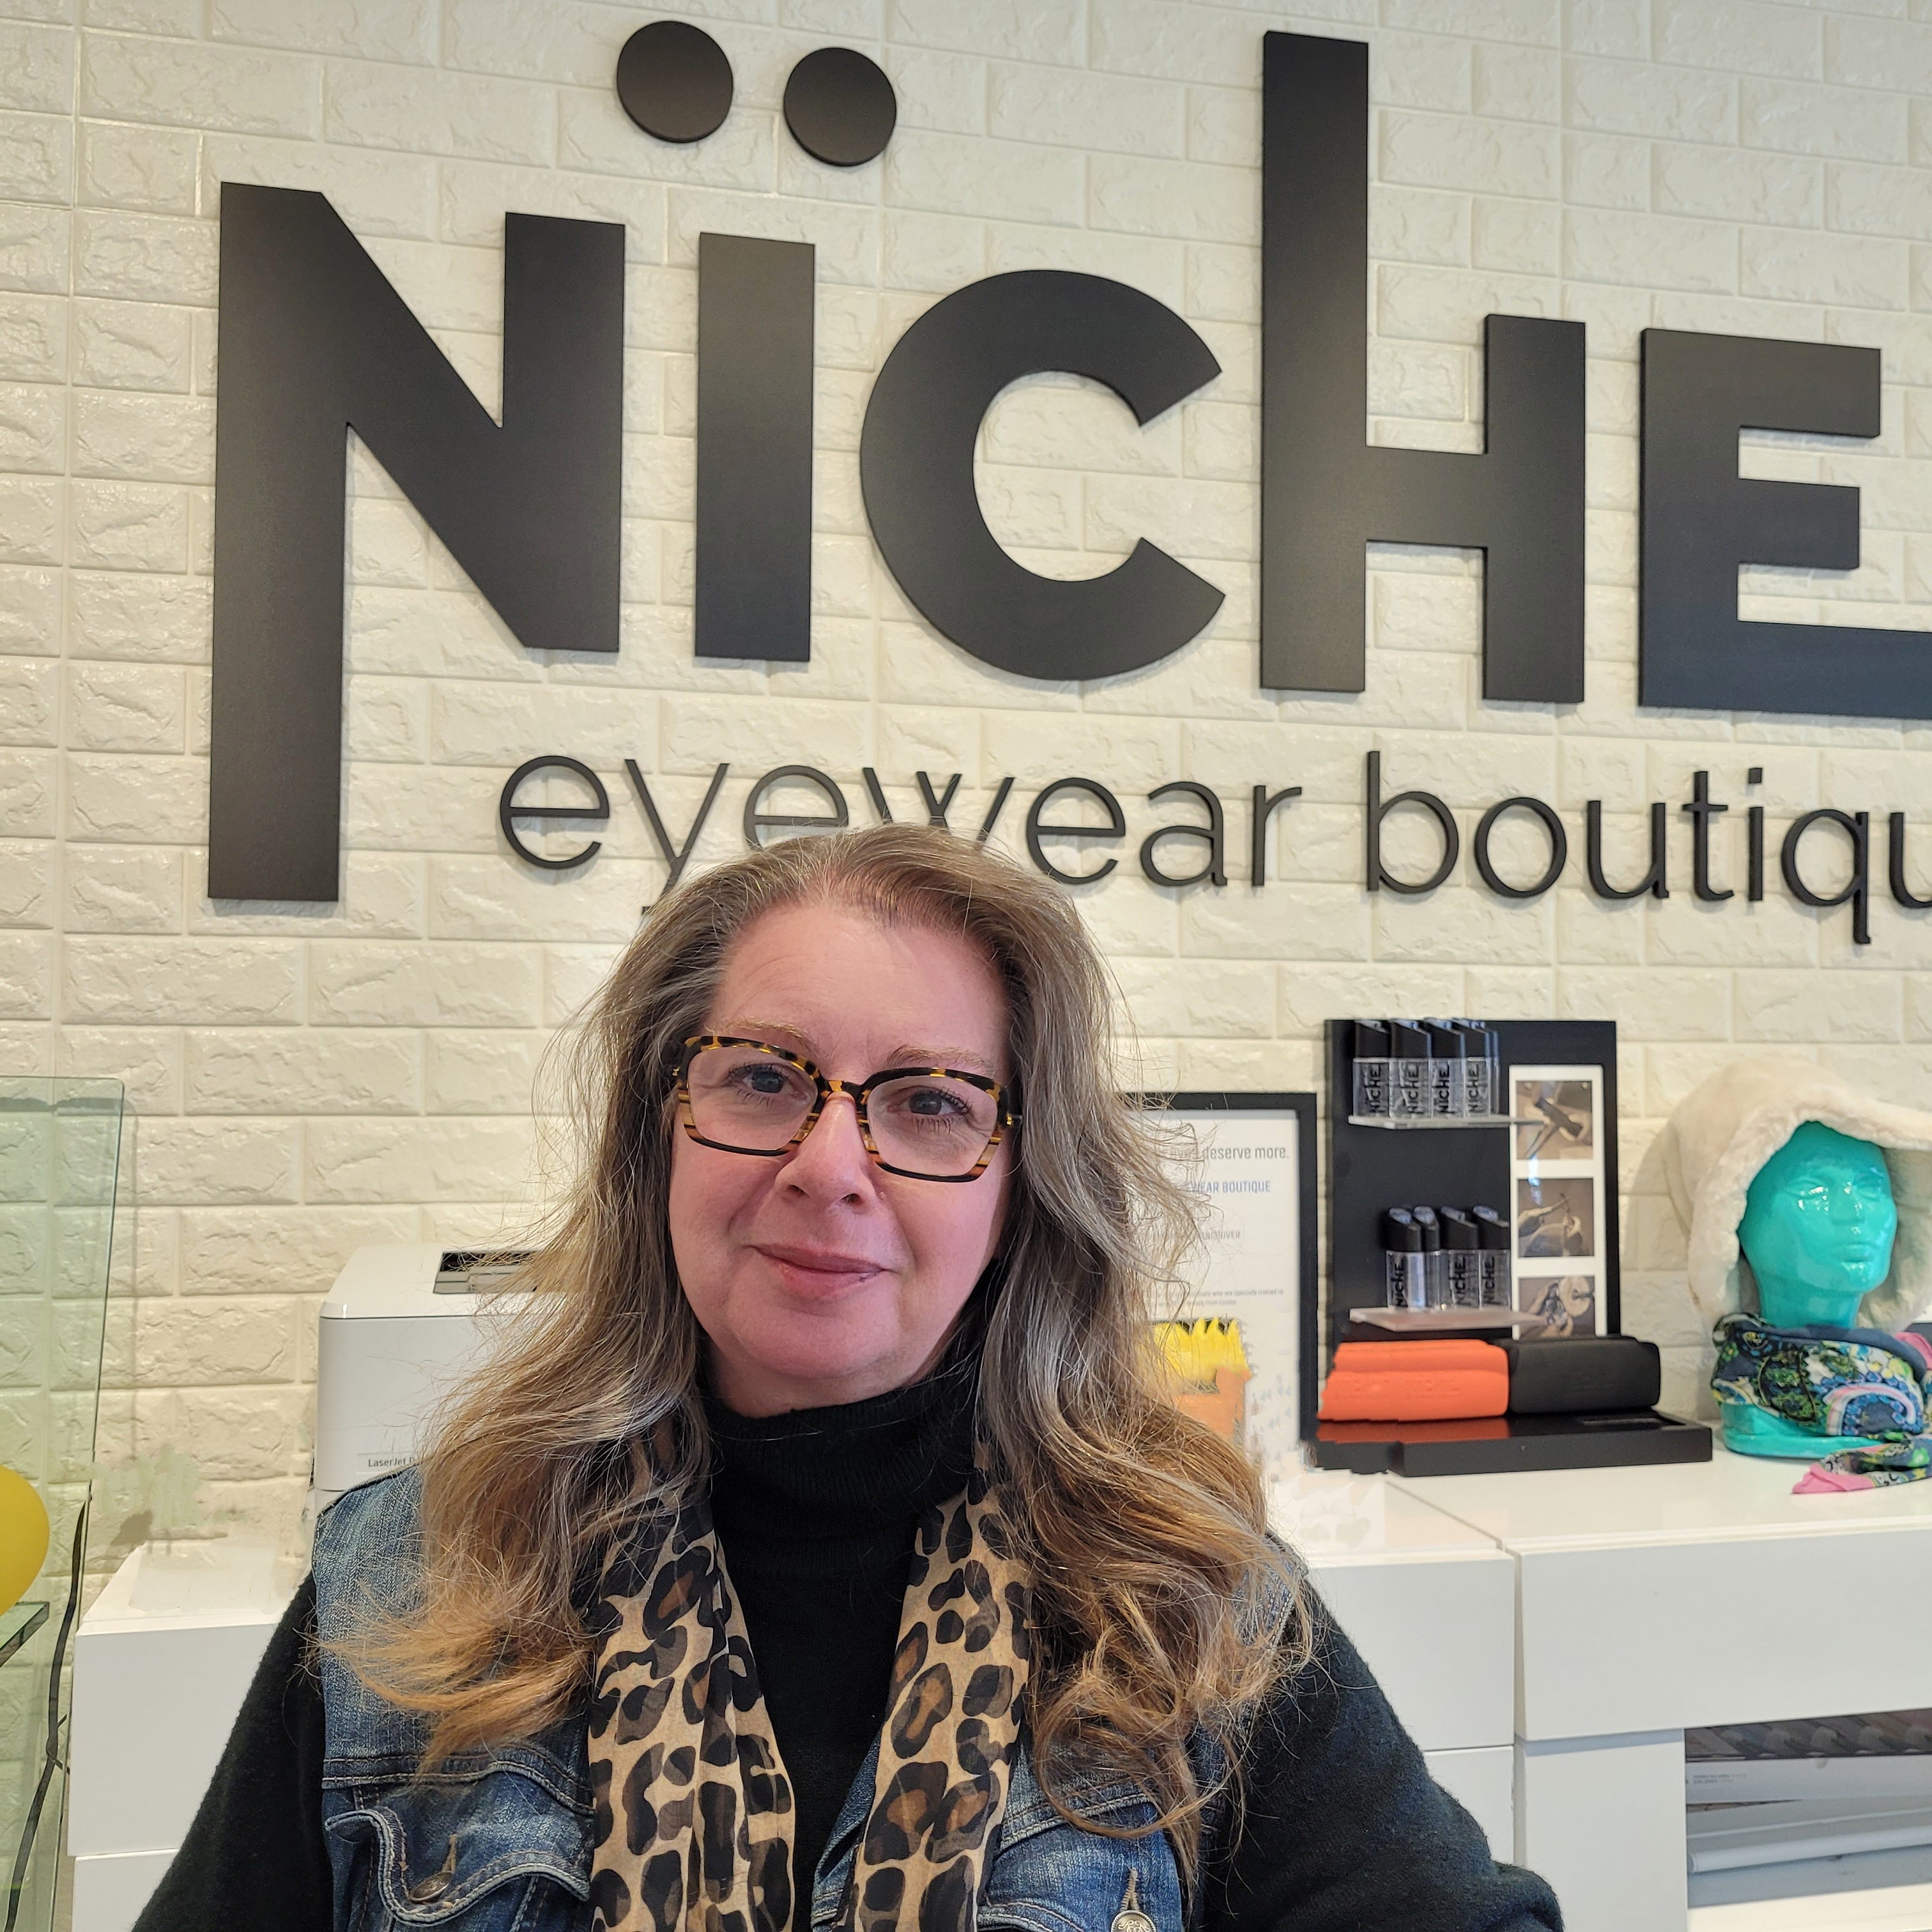 Licensed Optician and Managing Partner Vancouver, BC at Niche Eyewear Boutique - Michele Grisack